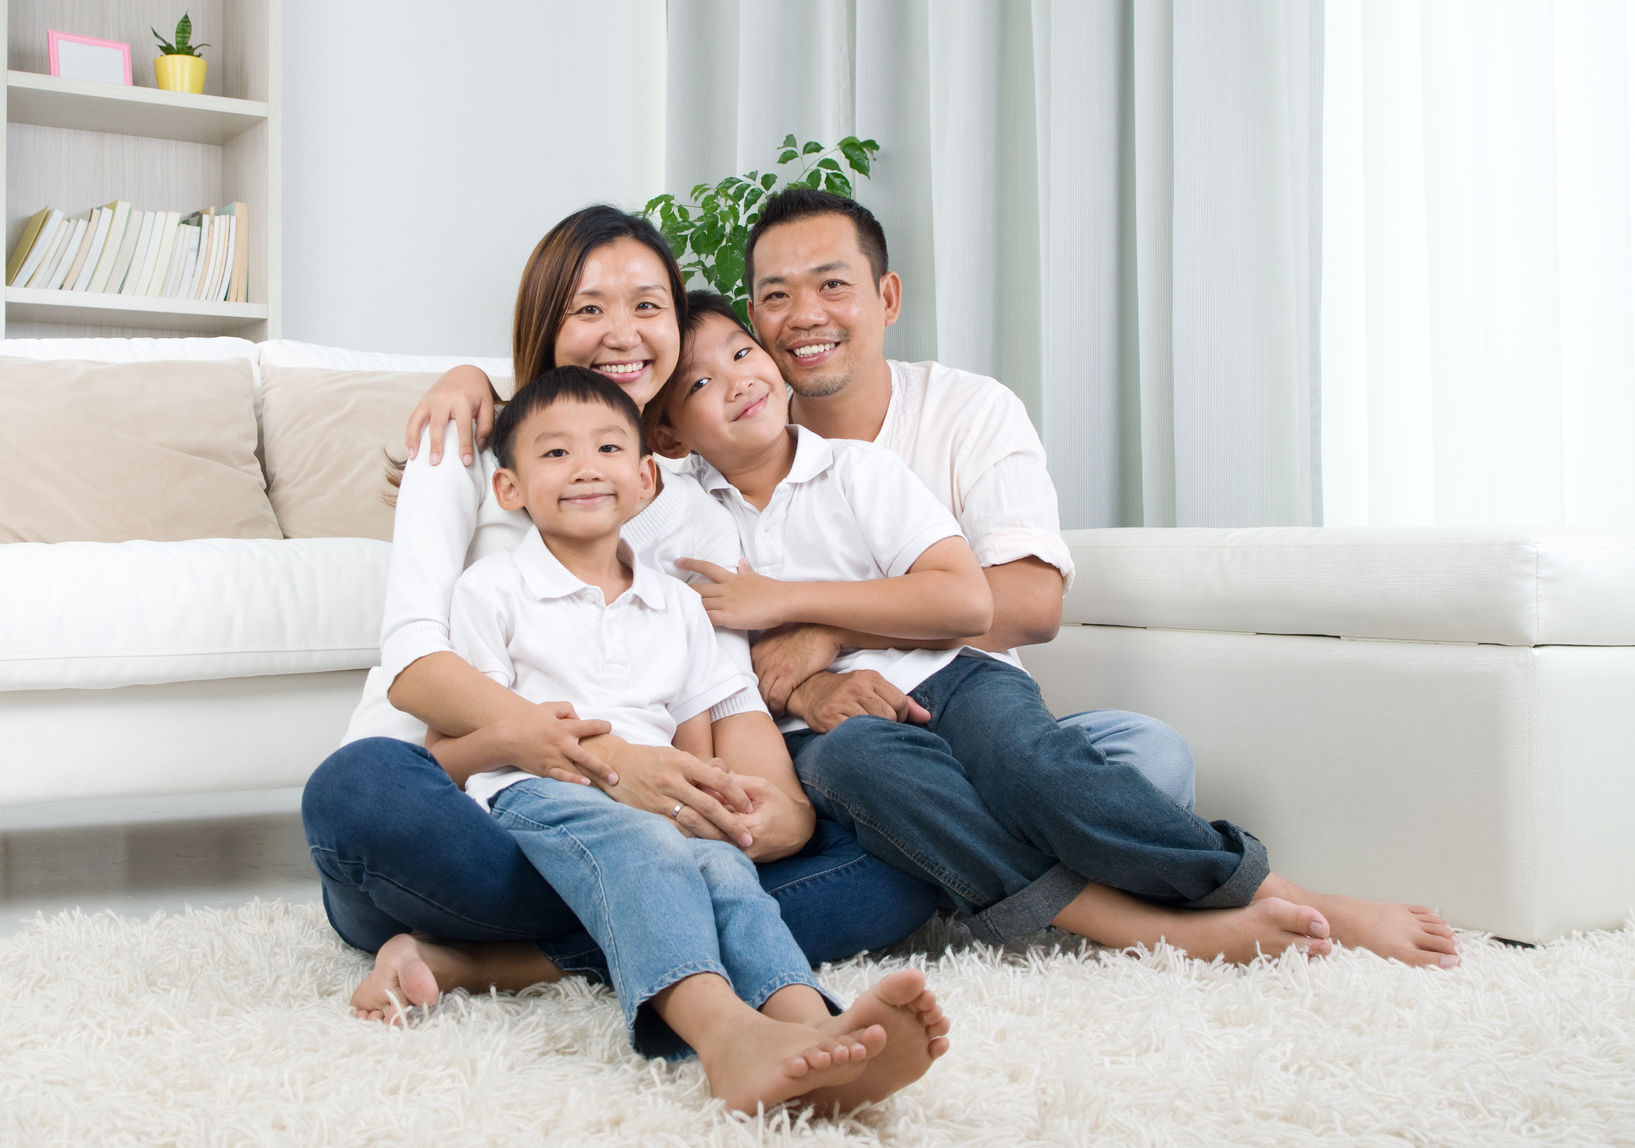 Asian family of four smiling at camera, sitting on living room carpet. Man, woman, and two boys